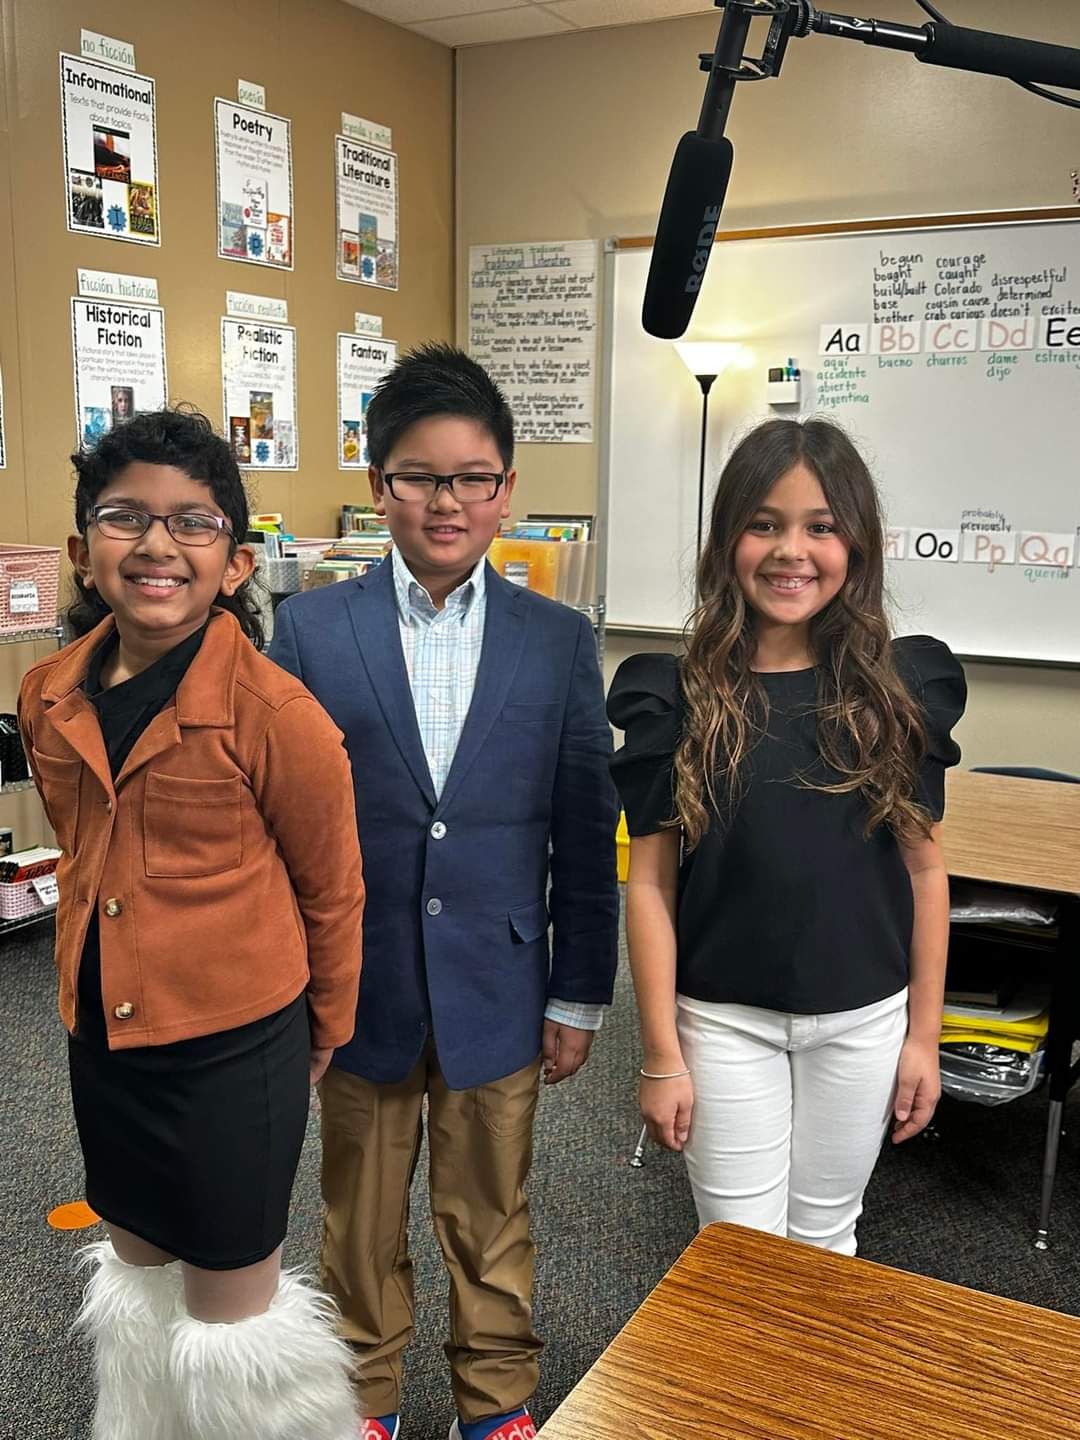 Three students pose with a microphone after filming a commerical.